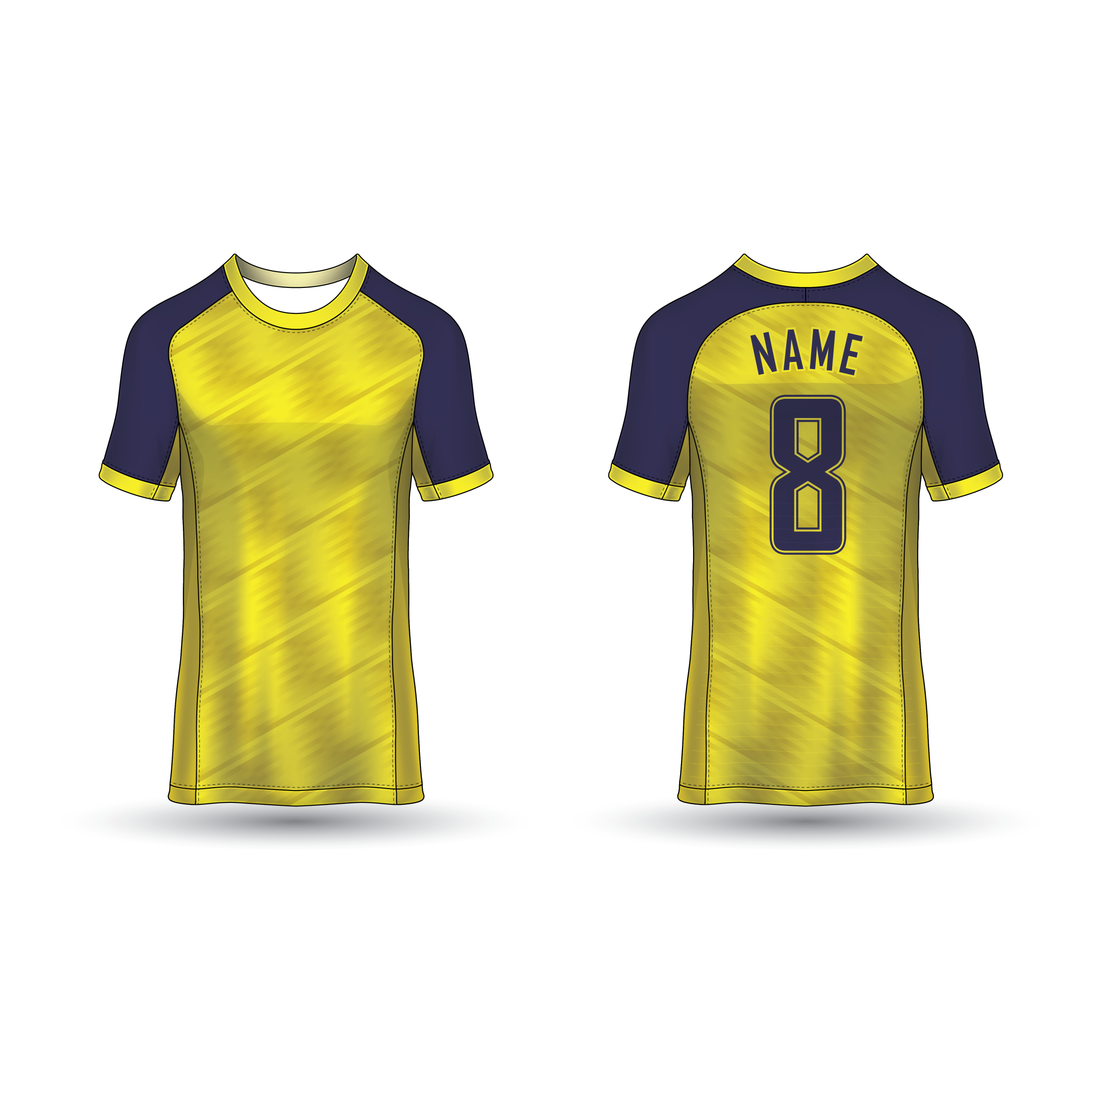 NEXT PRINT All Over Printed Customized Sublimation T-Shirt Unisex Sports Jersey Player Name & Number, Team Name NP50000240